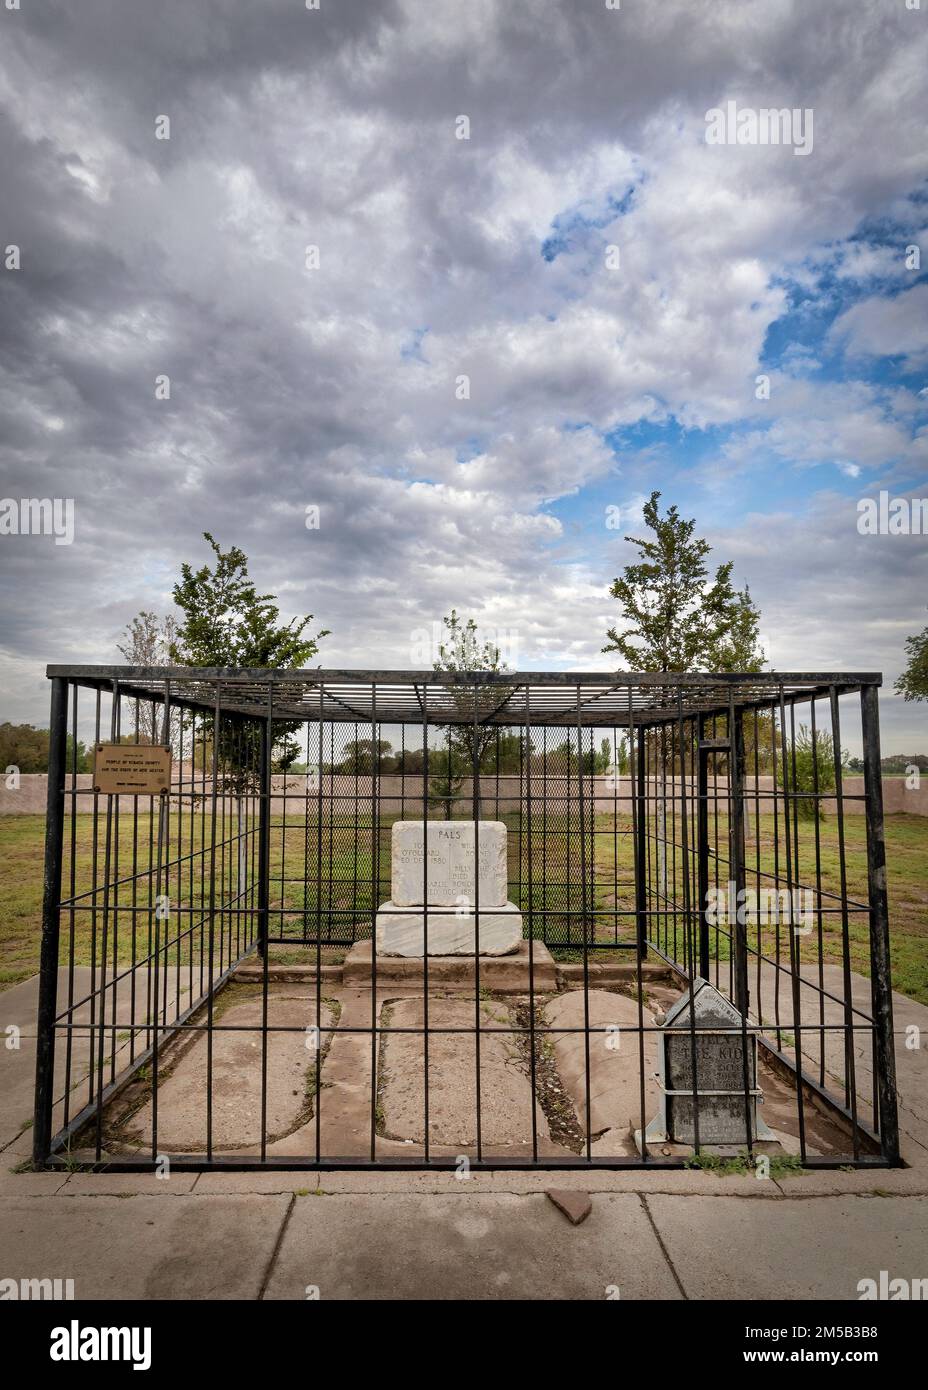 The black stone is the grave of Henry McCarty, aka William H. Bonney, and Billy the Kid at the Old Fort Sumner Cemetery in Fort Sumner, New Mexico. Stock Photo